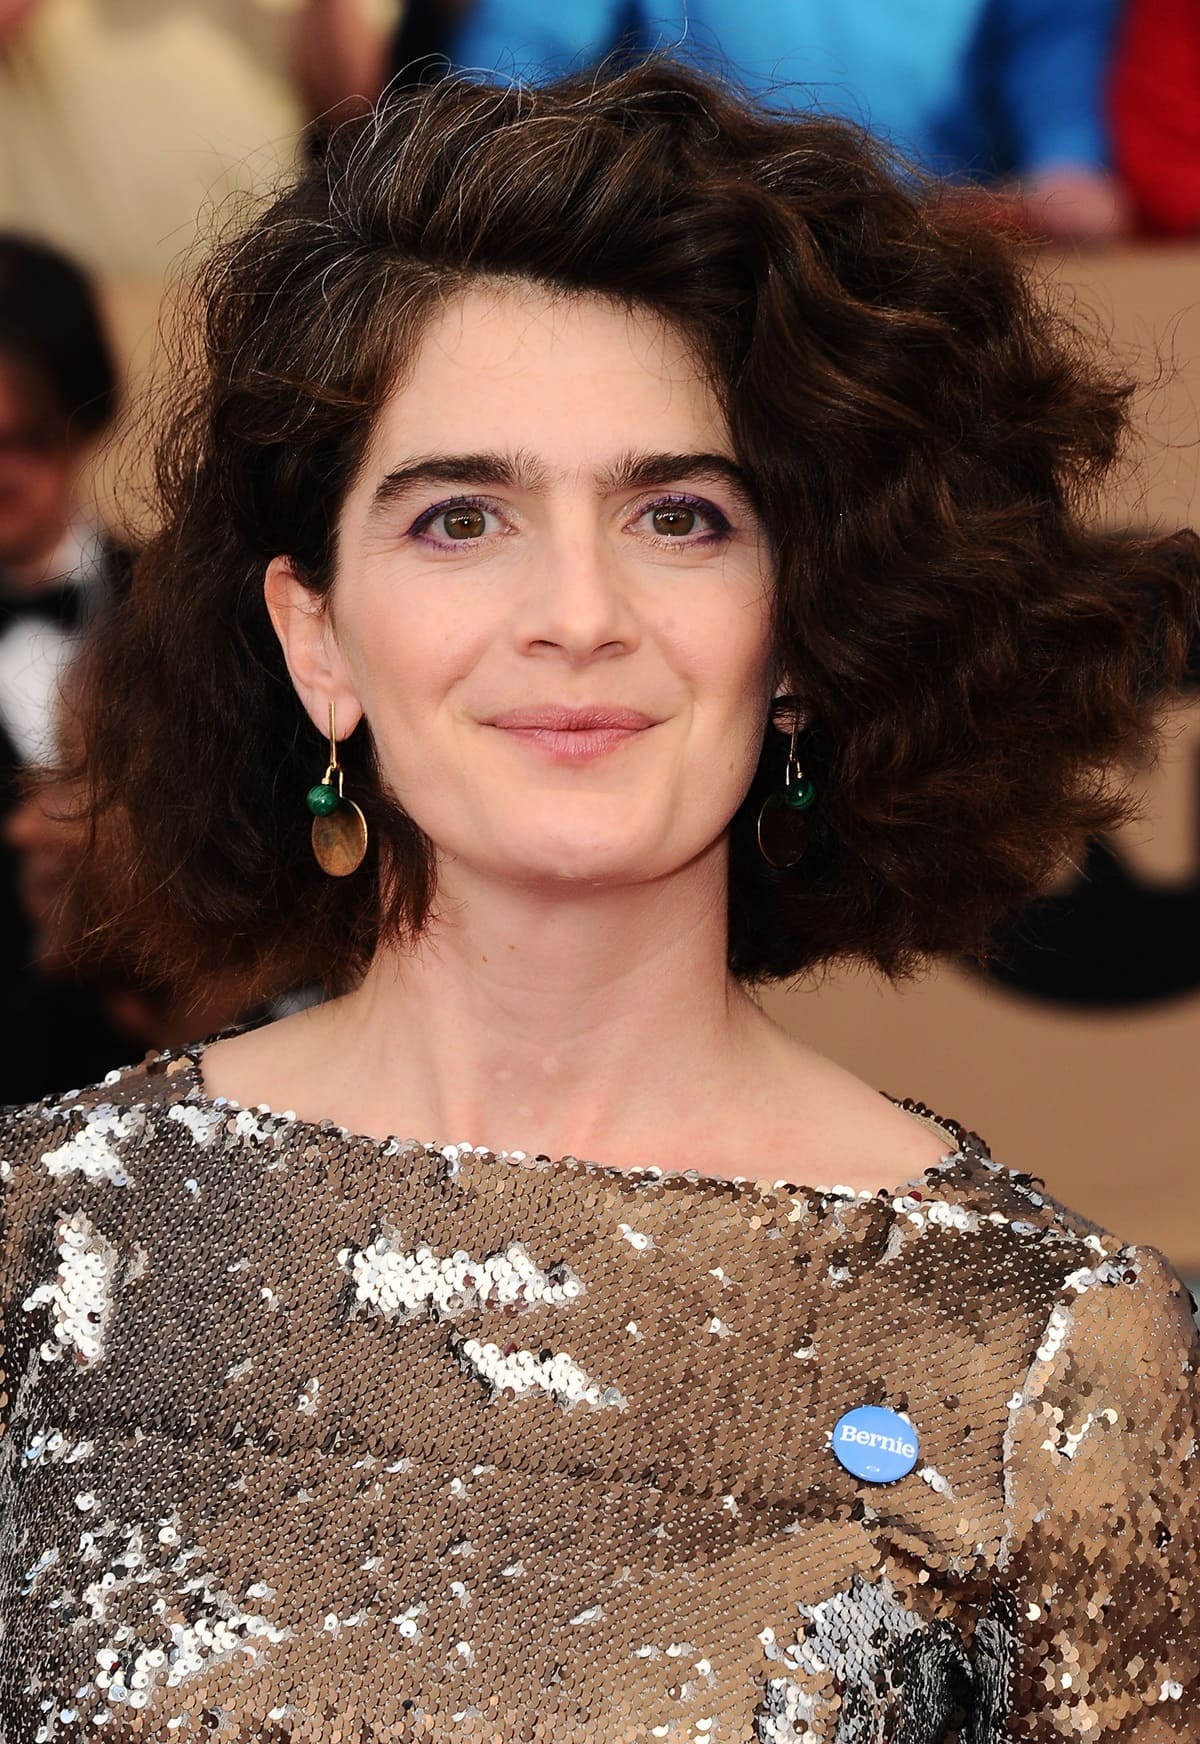 Gaby Hoffmann, who played the youngest daughter of Bob and Cindy Russell in Uncle Buck, in a stunning sequined Rachel Comey dress with a small blue Bernie Sanders pin at the 22nd Annual Screen Actors Guild Awards